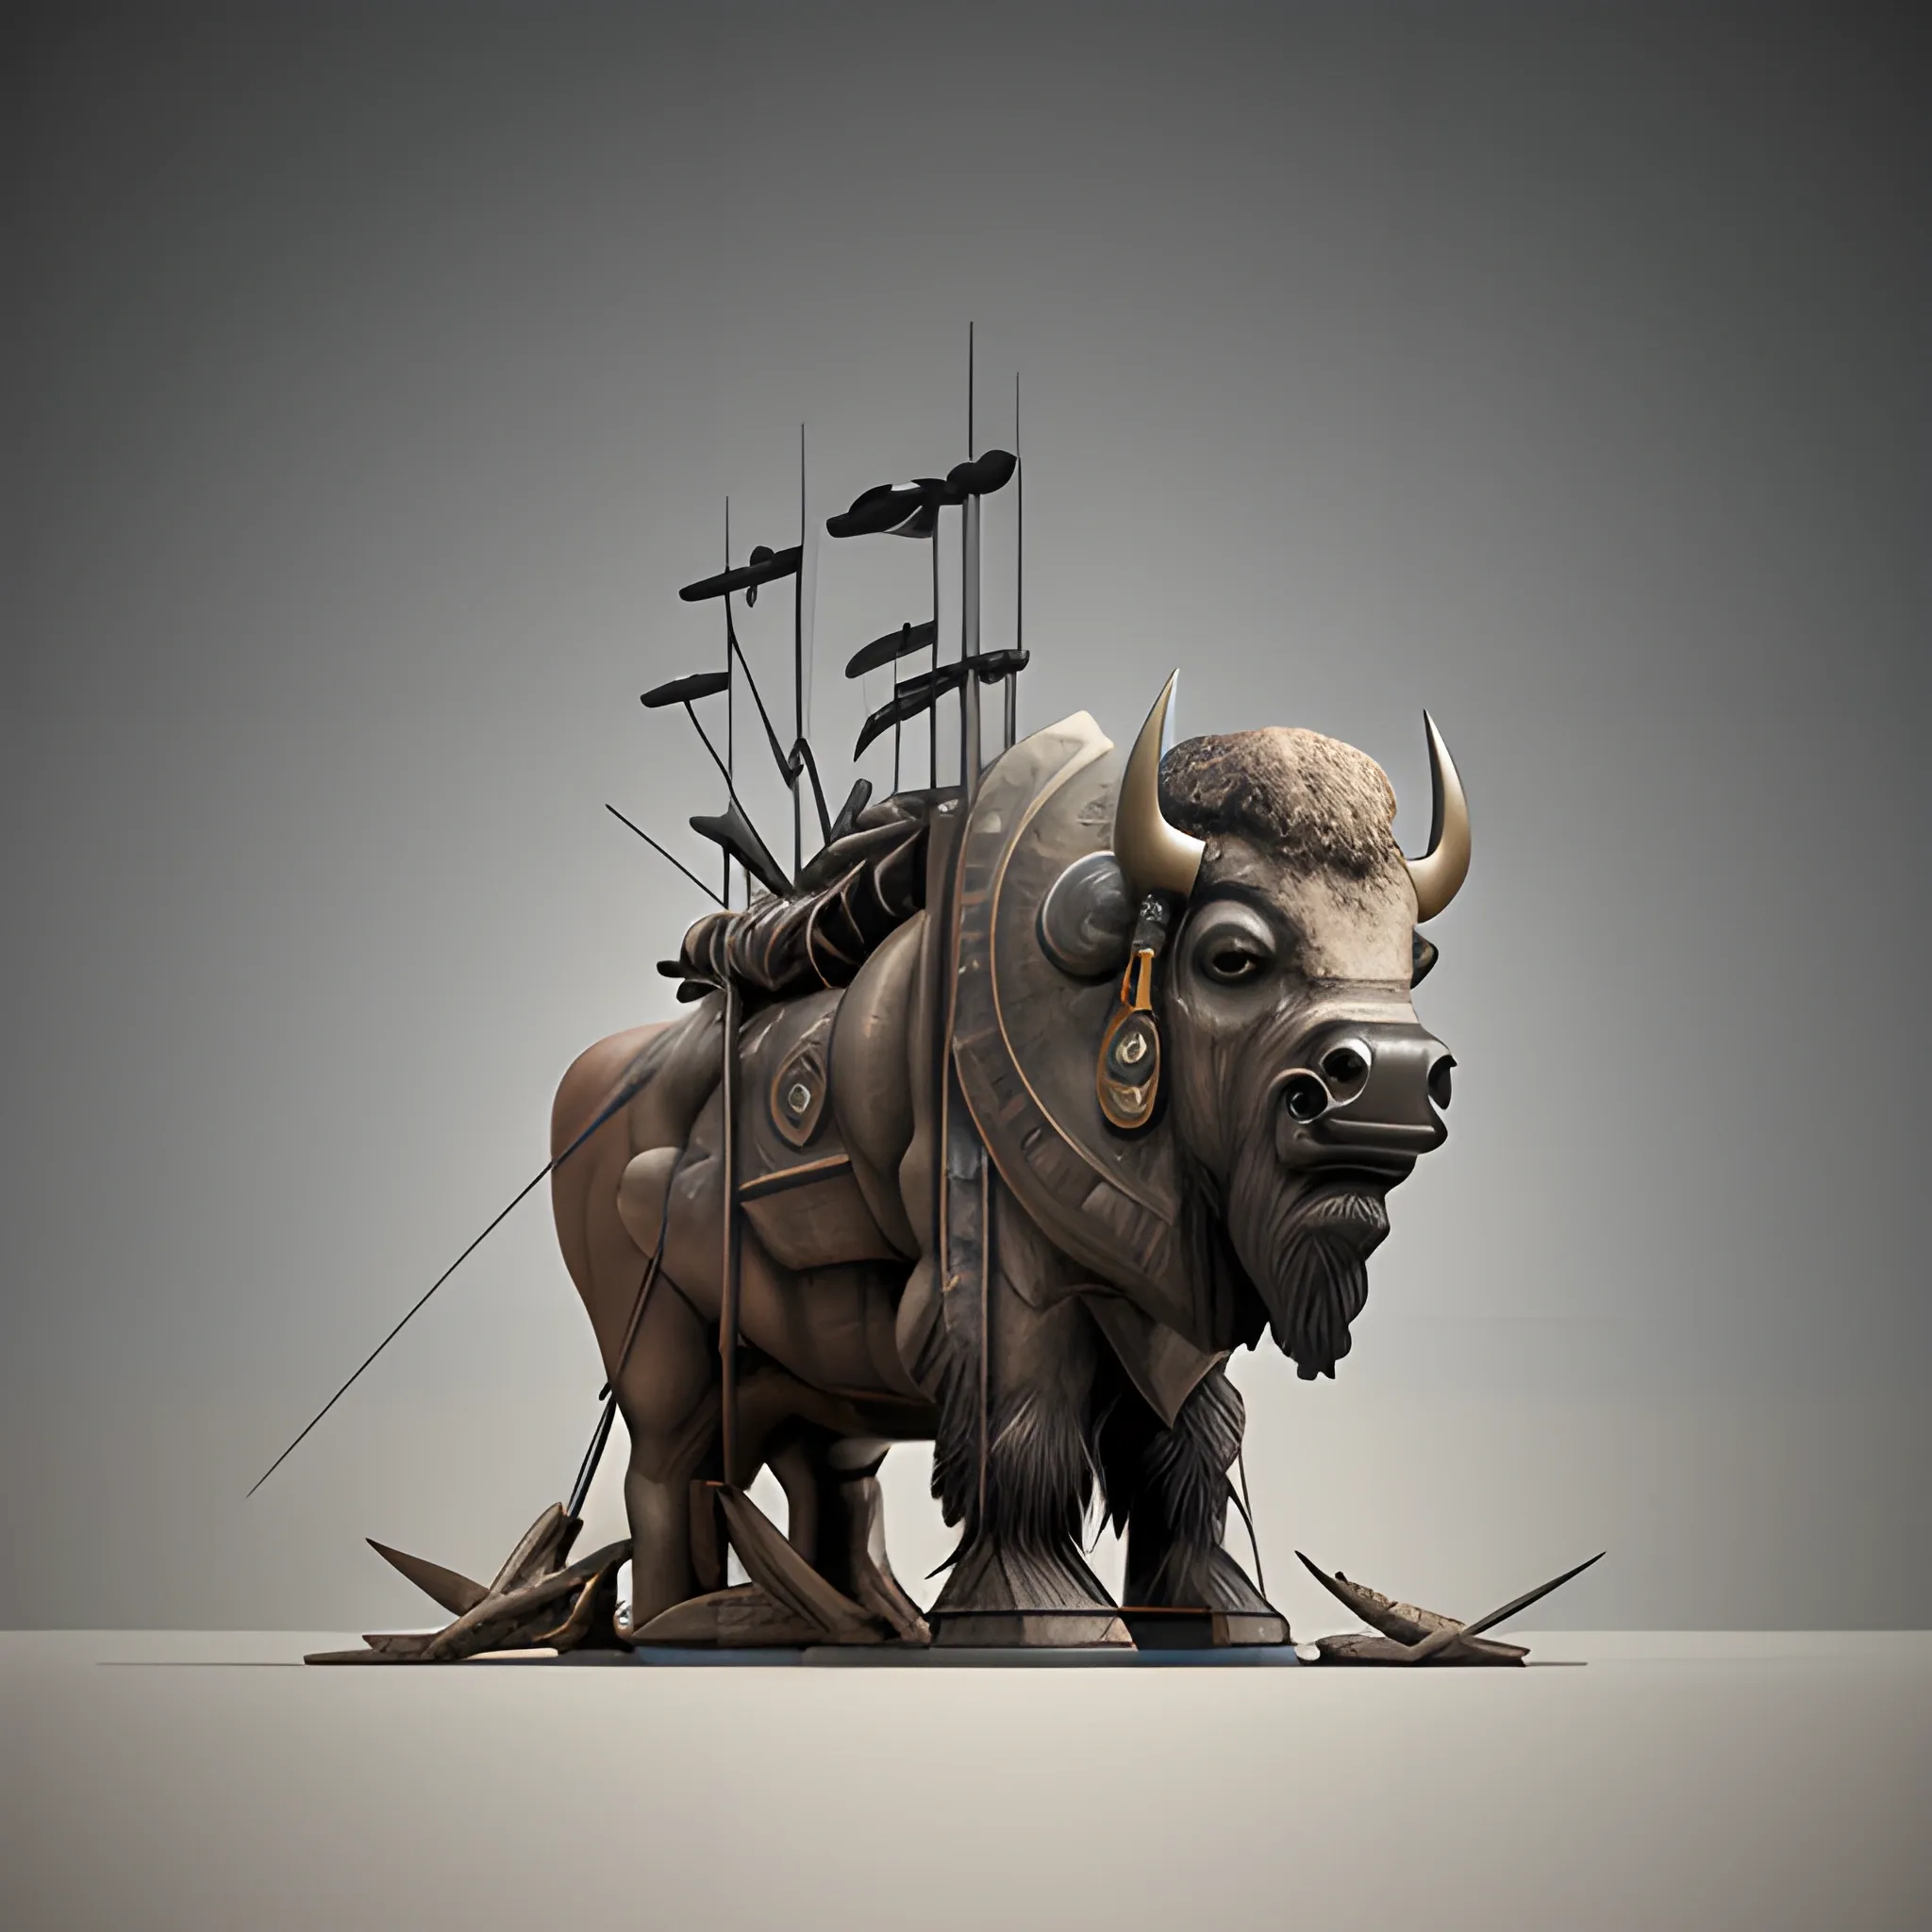 sculptural set in Brancusi style , Big metalical Bison featured native american hunters, gear and riveted steel,  digital matte realistic surface, illustration sharp focus, elegant intricate digital painting, abstract concept, art global illumination, ray tracing advanced technology, simple composition, elegant shapes, glam monumental, low perspective look

